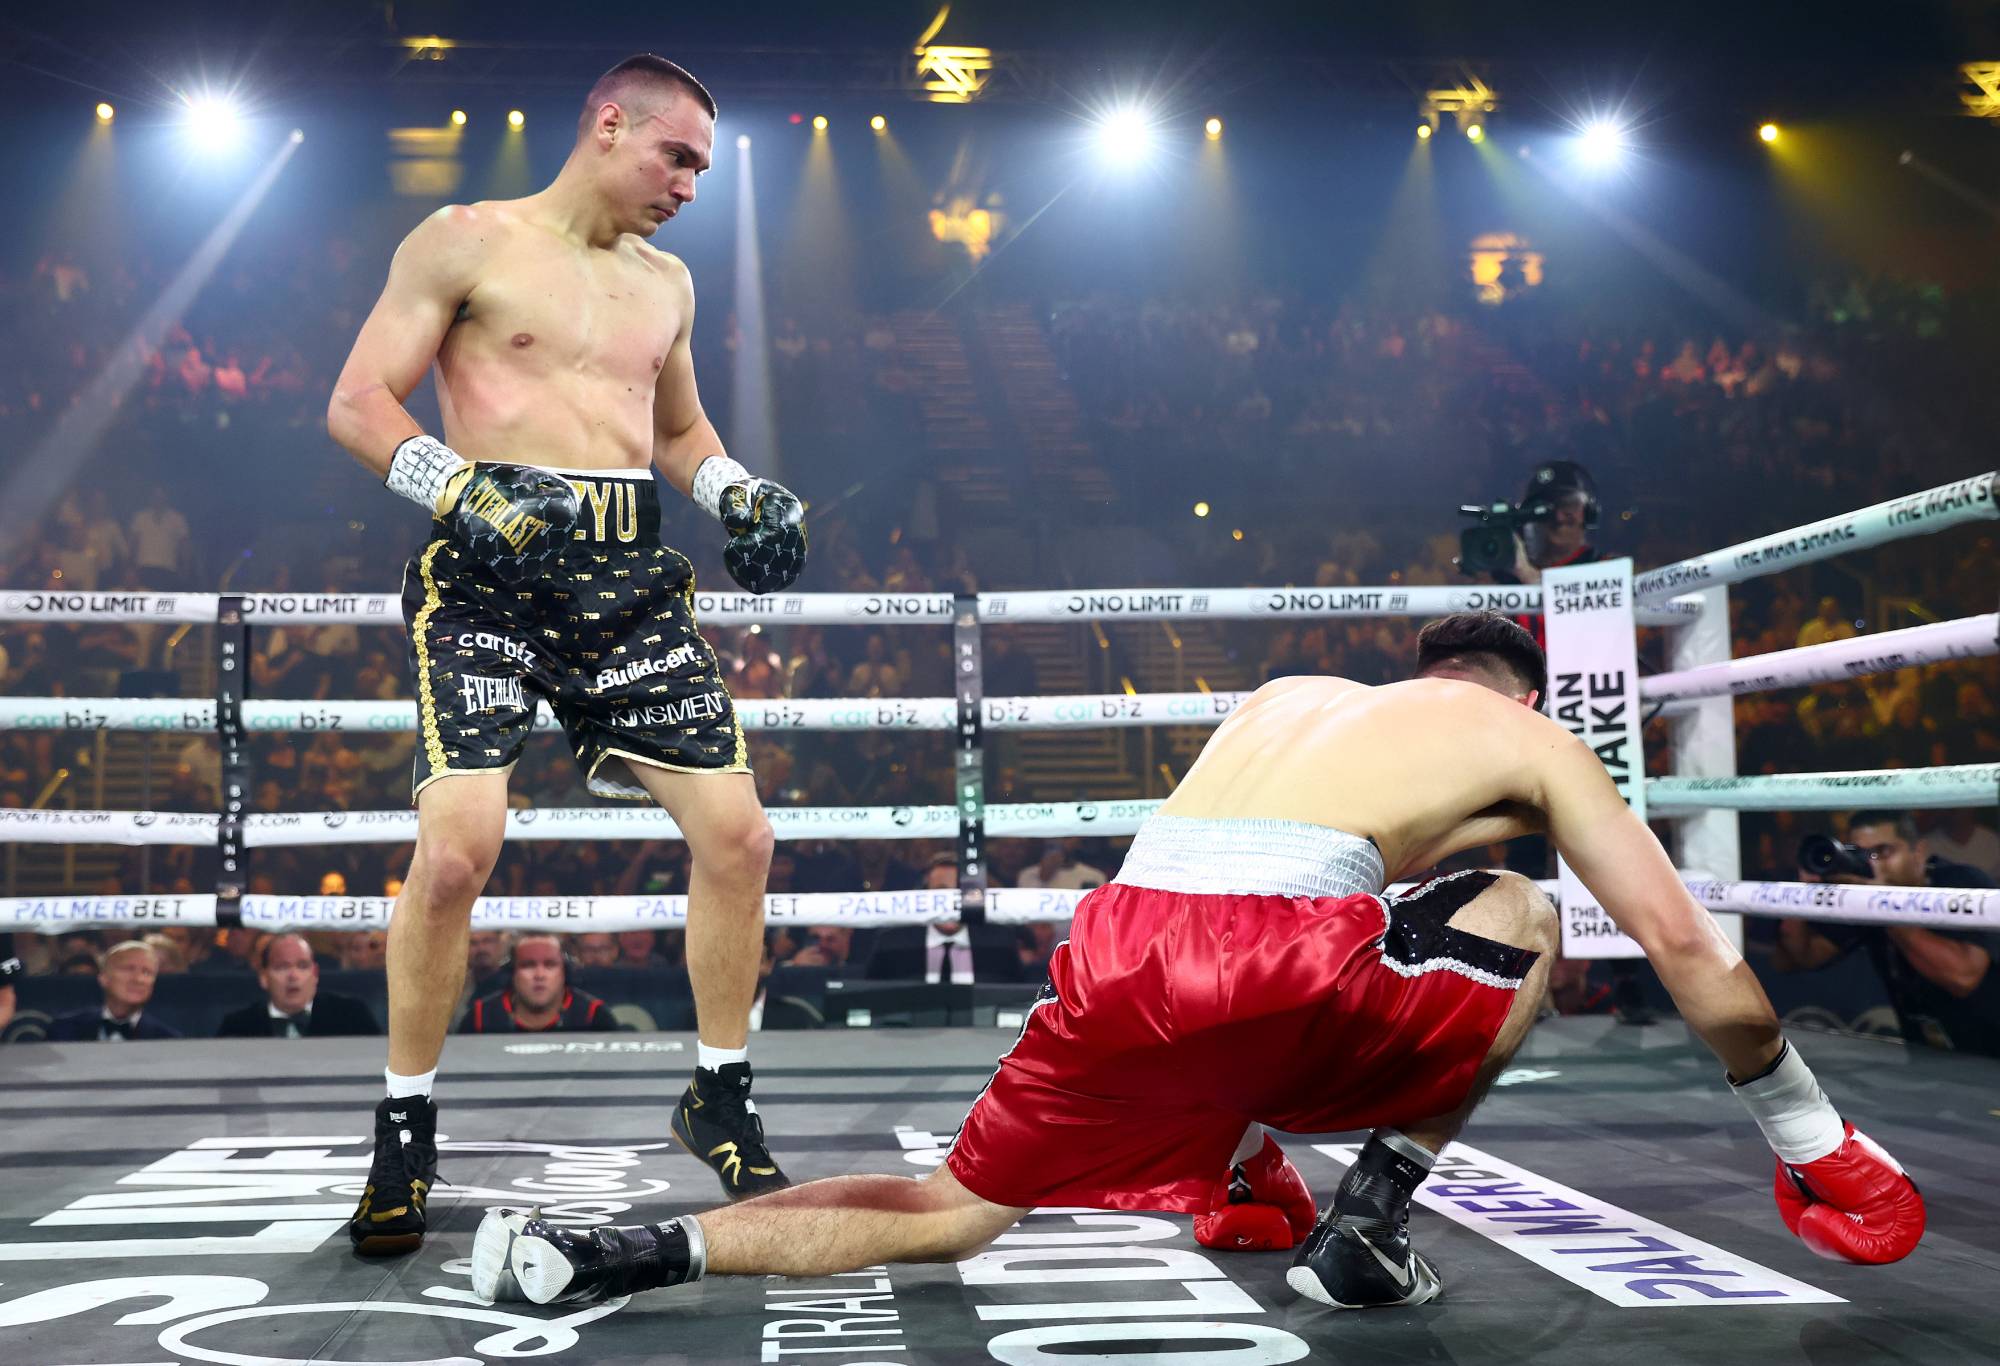 Carlos Ocampo falls to the ground after being punched by Tim Tszyu (left) during the WBO Iterim Super-Welterwight title bout at Gold Coast Convention and Entertainment Centre on June 18, 2023 in Gold Coast, Australia. (Photo by Chris Hyde/Getty Images)